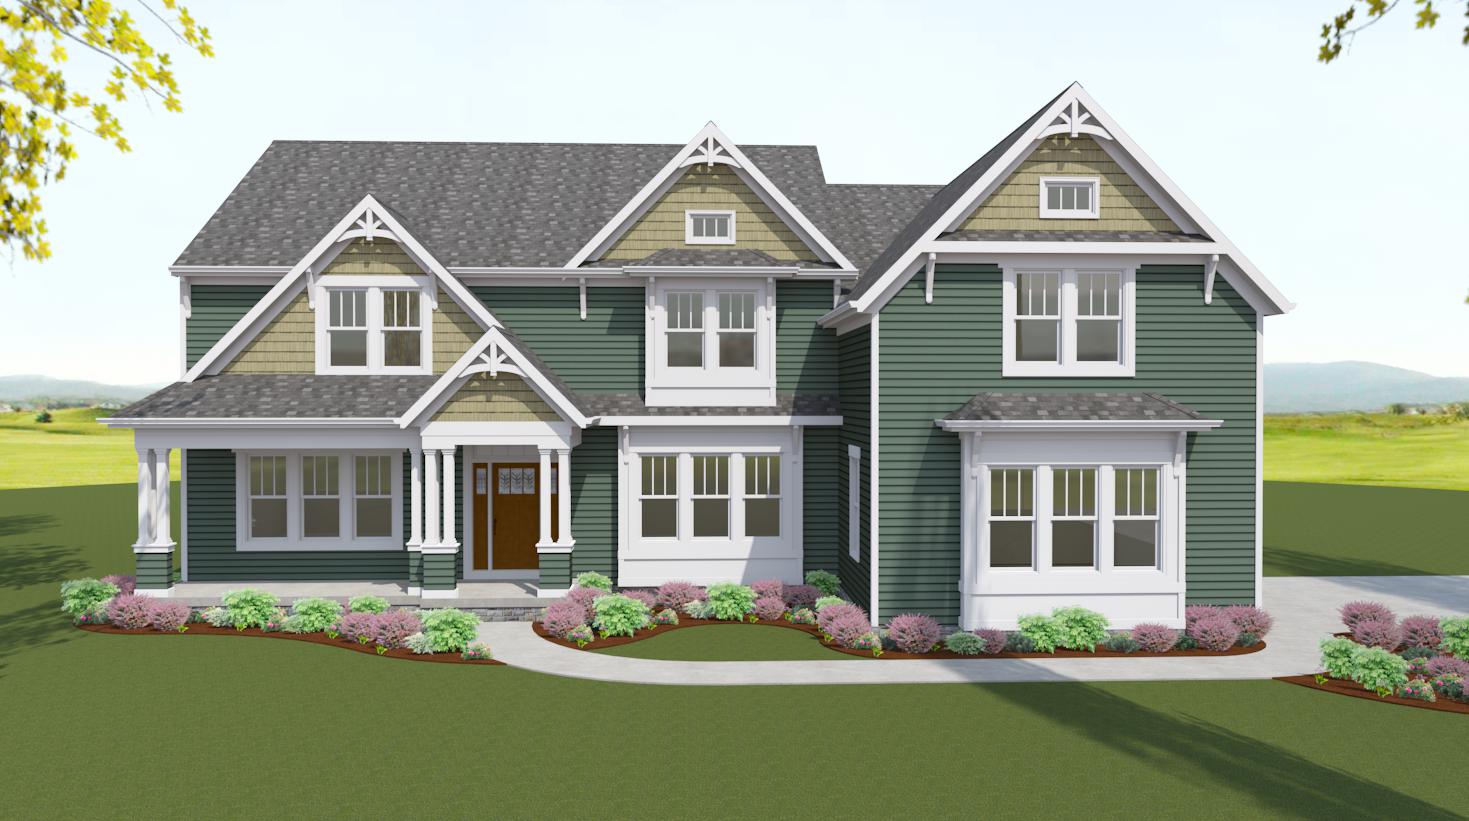 3D graphic of "The Colton" craftsman farm style home. The house is green, white, grey, and brown.